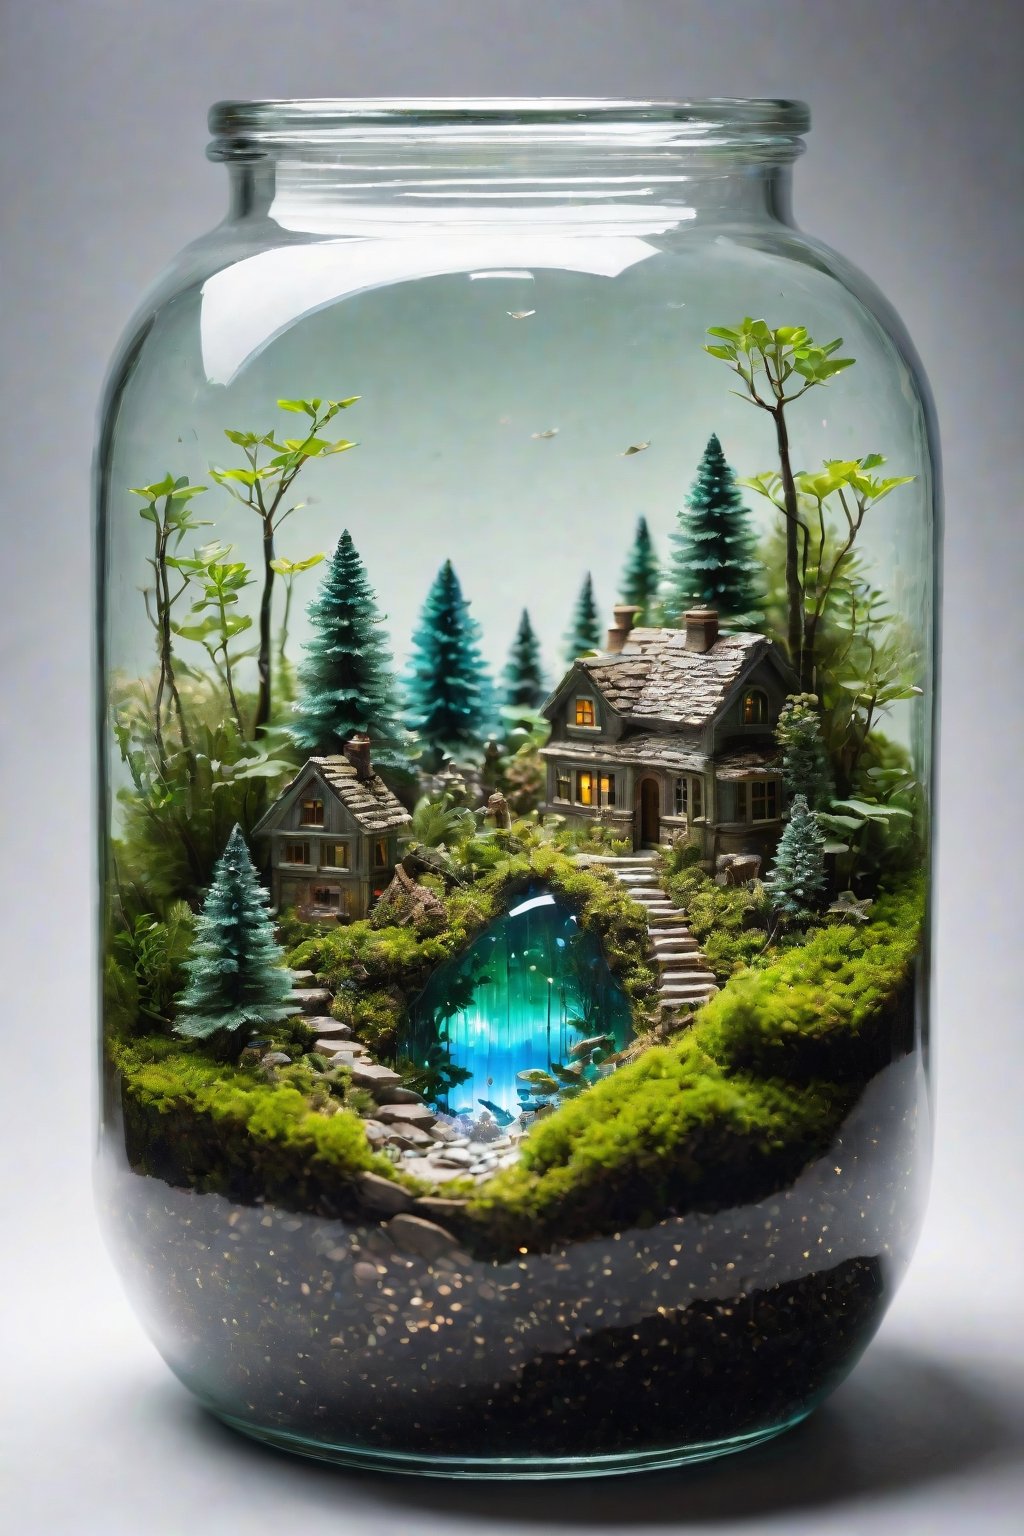 A front view of a closed terrarium ecosystem in a jar with a miniature forest and village inside, Broken Glass effect, no background, stunning, something that even doesn't exist, mythical being, energy, molecular, textures, iridescent and luminescent scales, breathtaking beauty, pure perfection, divine presence, unforgettable, impressive, breathtaking beauty, Volumetric light, auras, rays, vivid colors reflects.